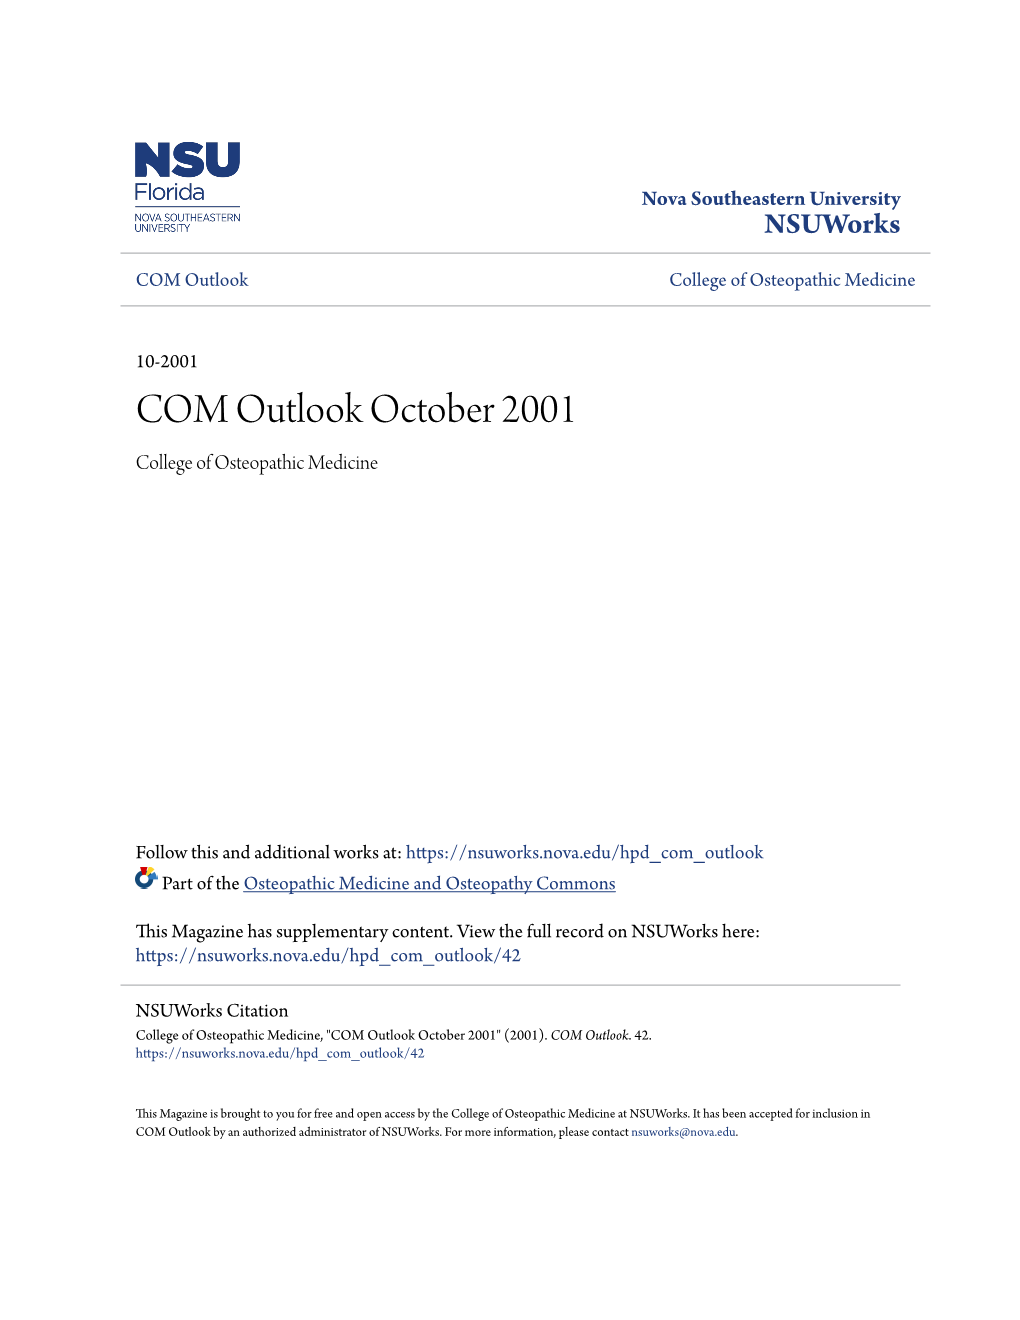 COM Outlook October 2001 College of Osteopathic Medicine